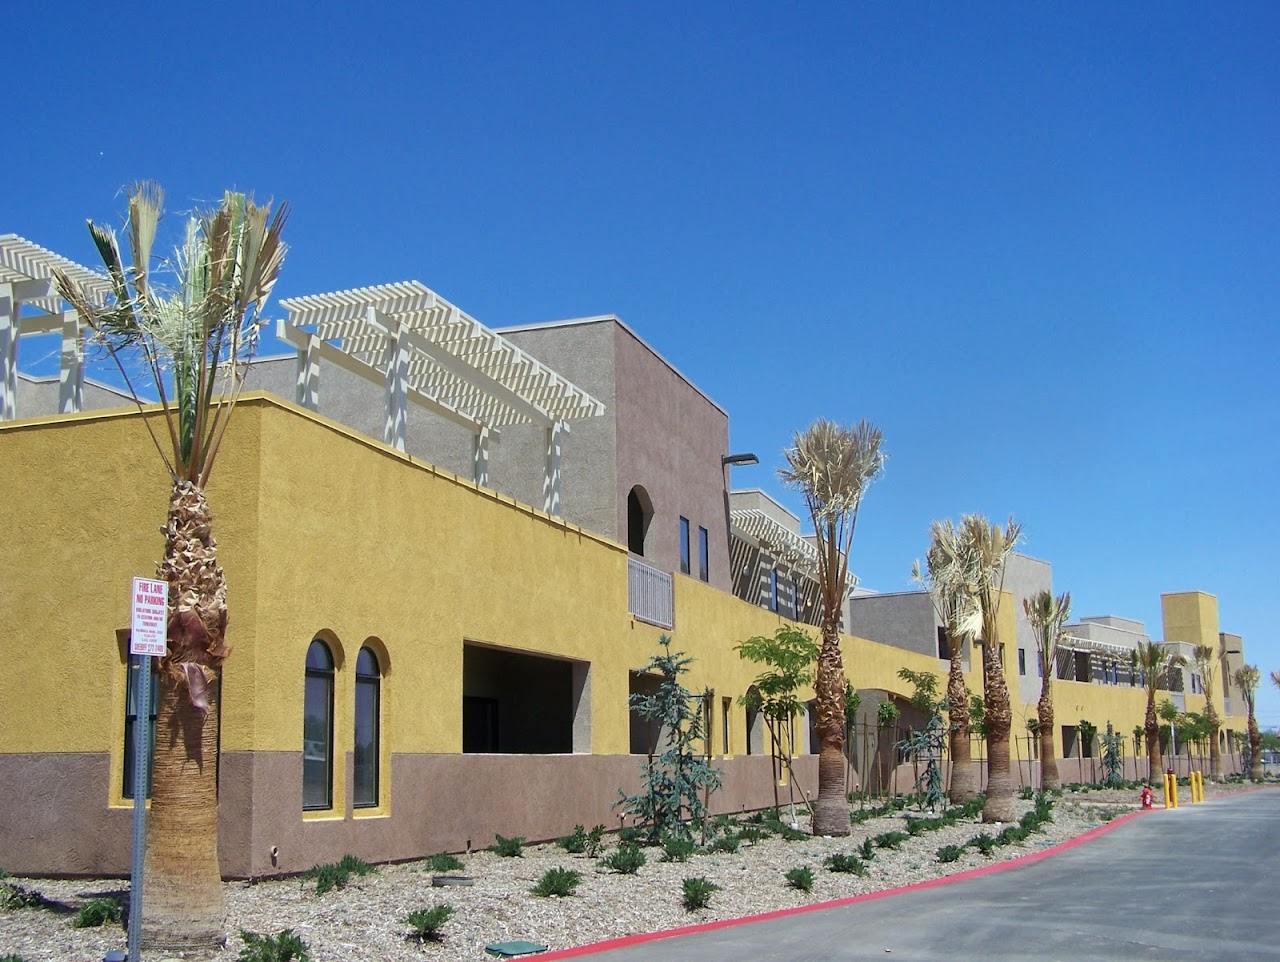 Photo of WHISPERING PALMS APTS. Affordable housing located at 38250 NINTH ST E PALMDALE, CA 93550